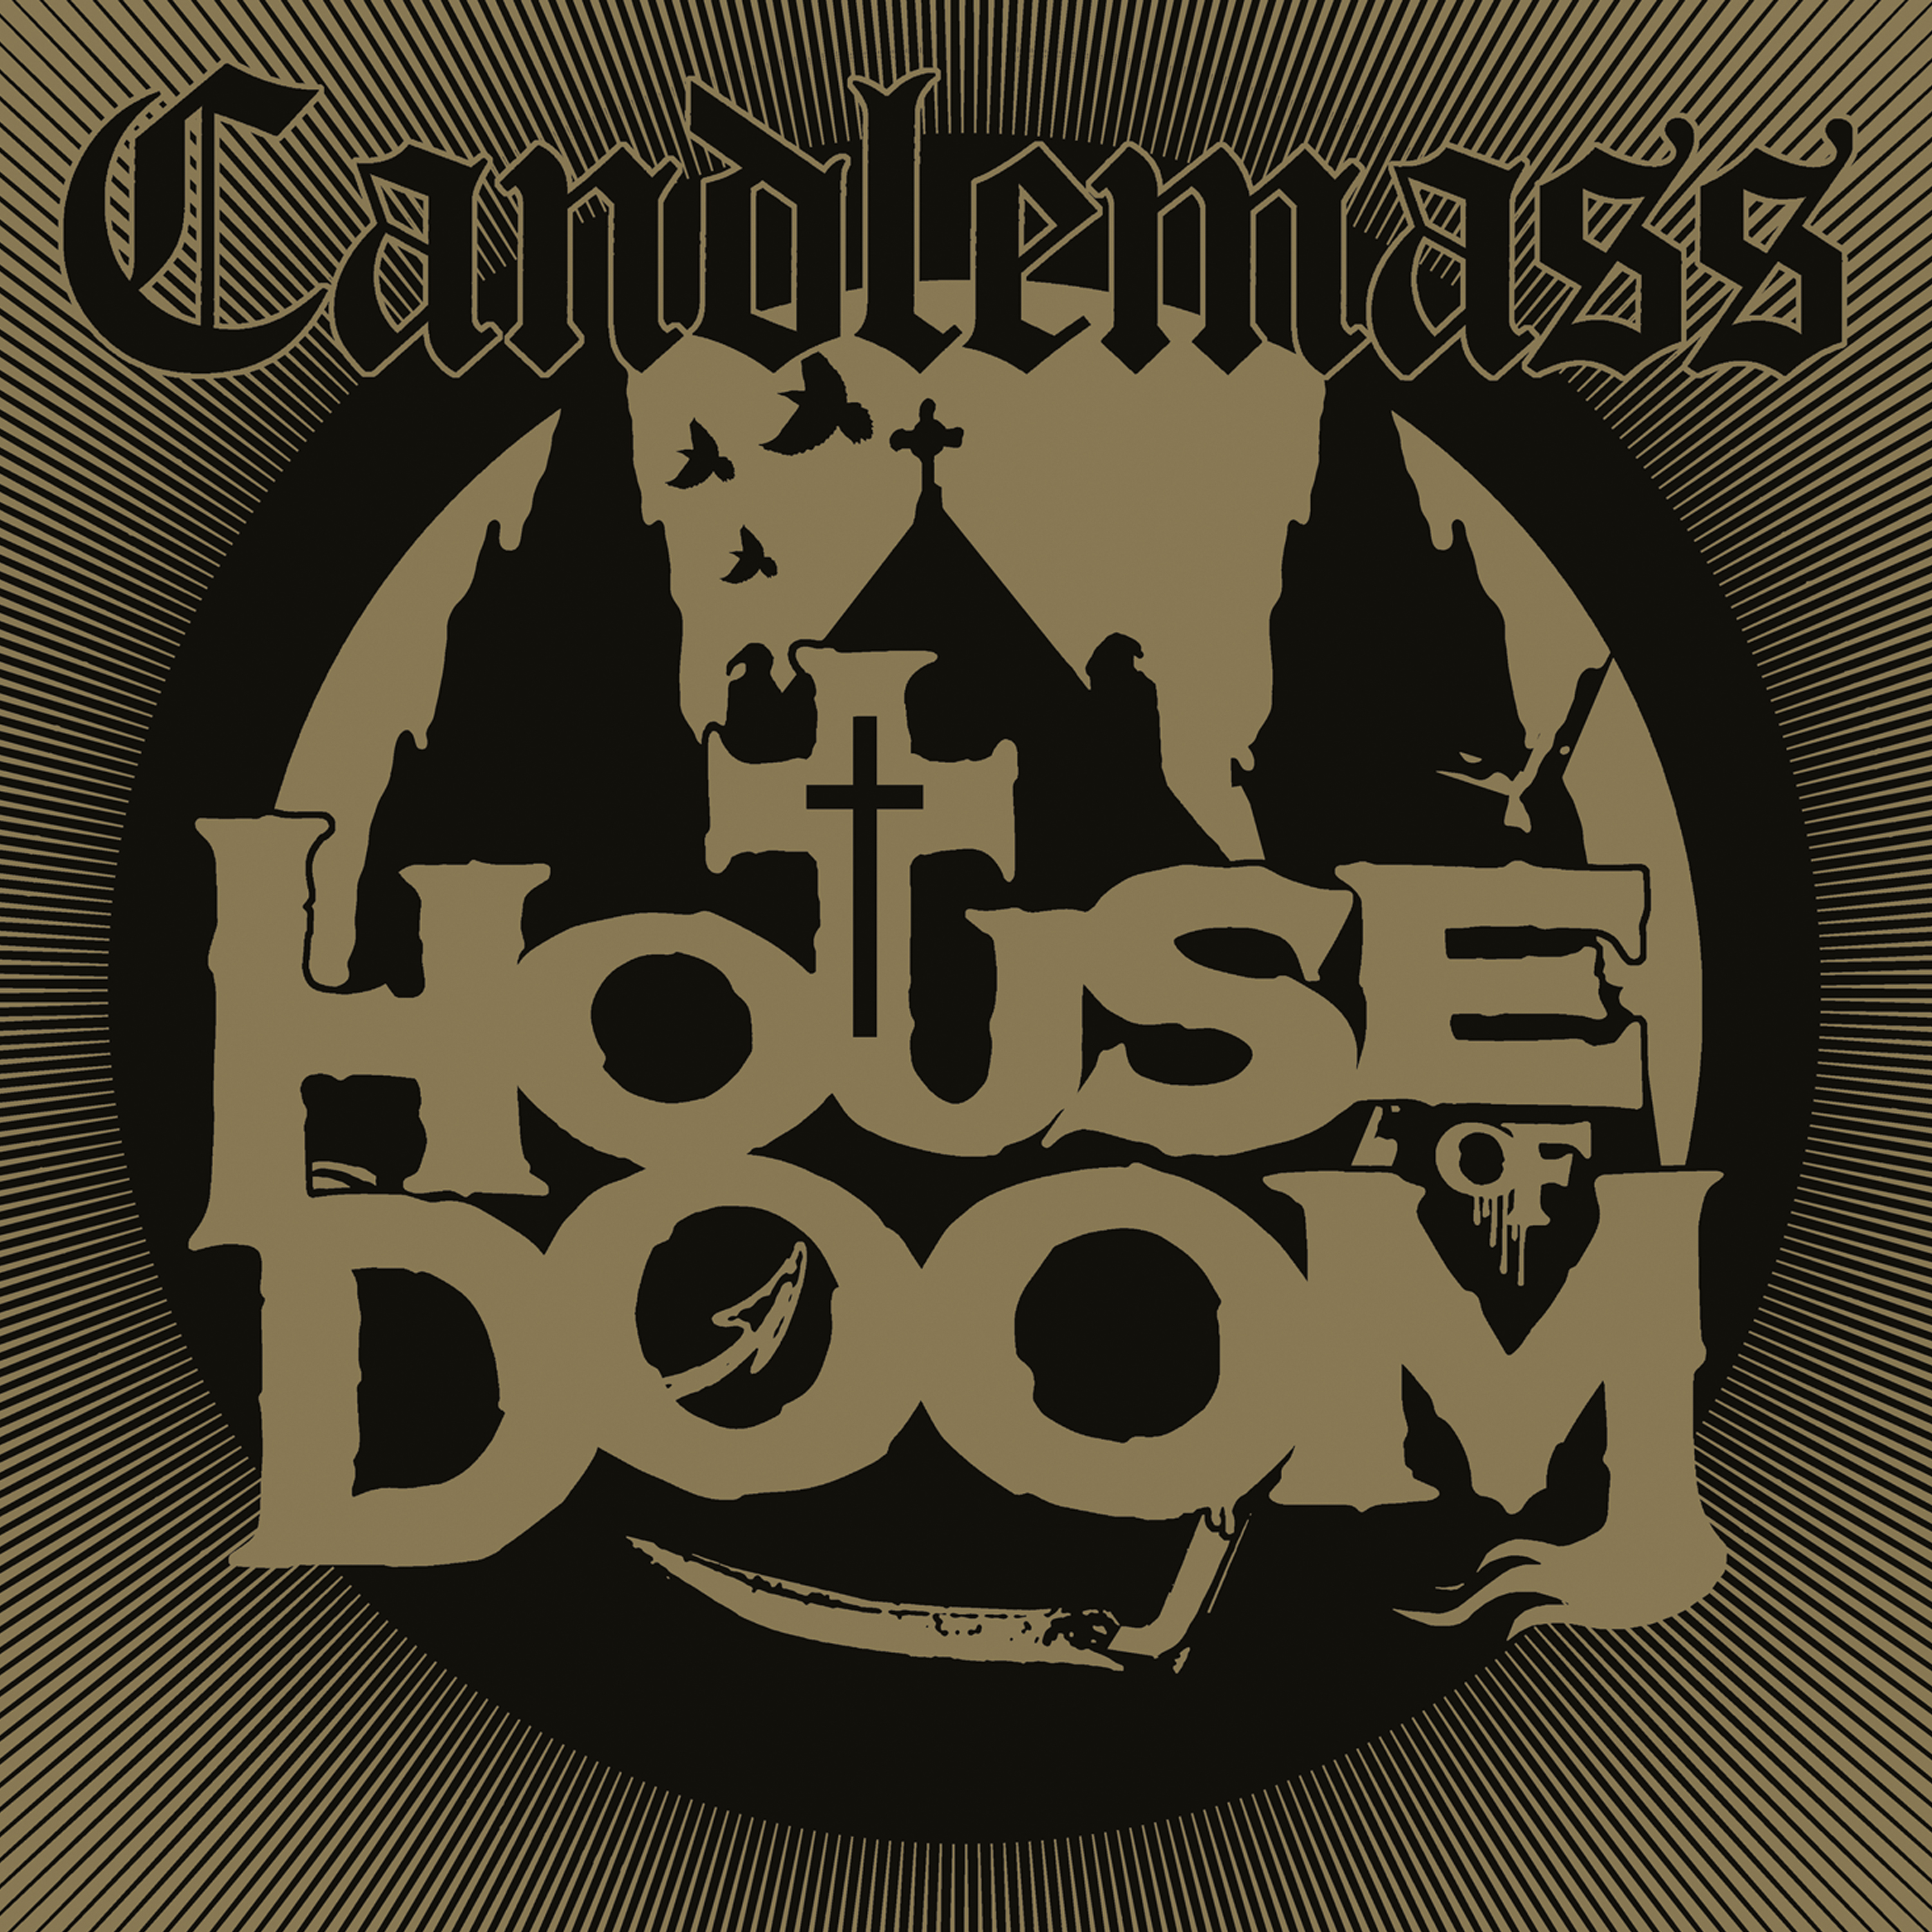 Review: Candlemass, ‘House of Doom’